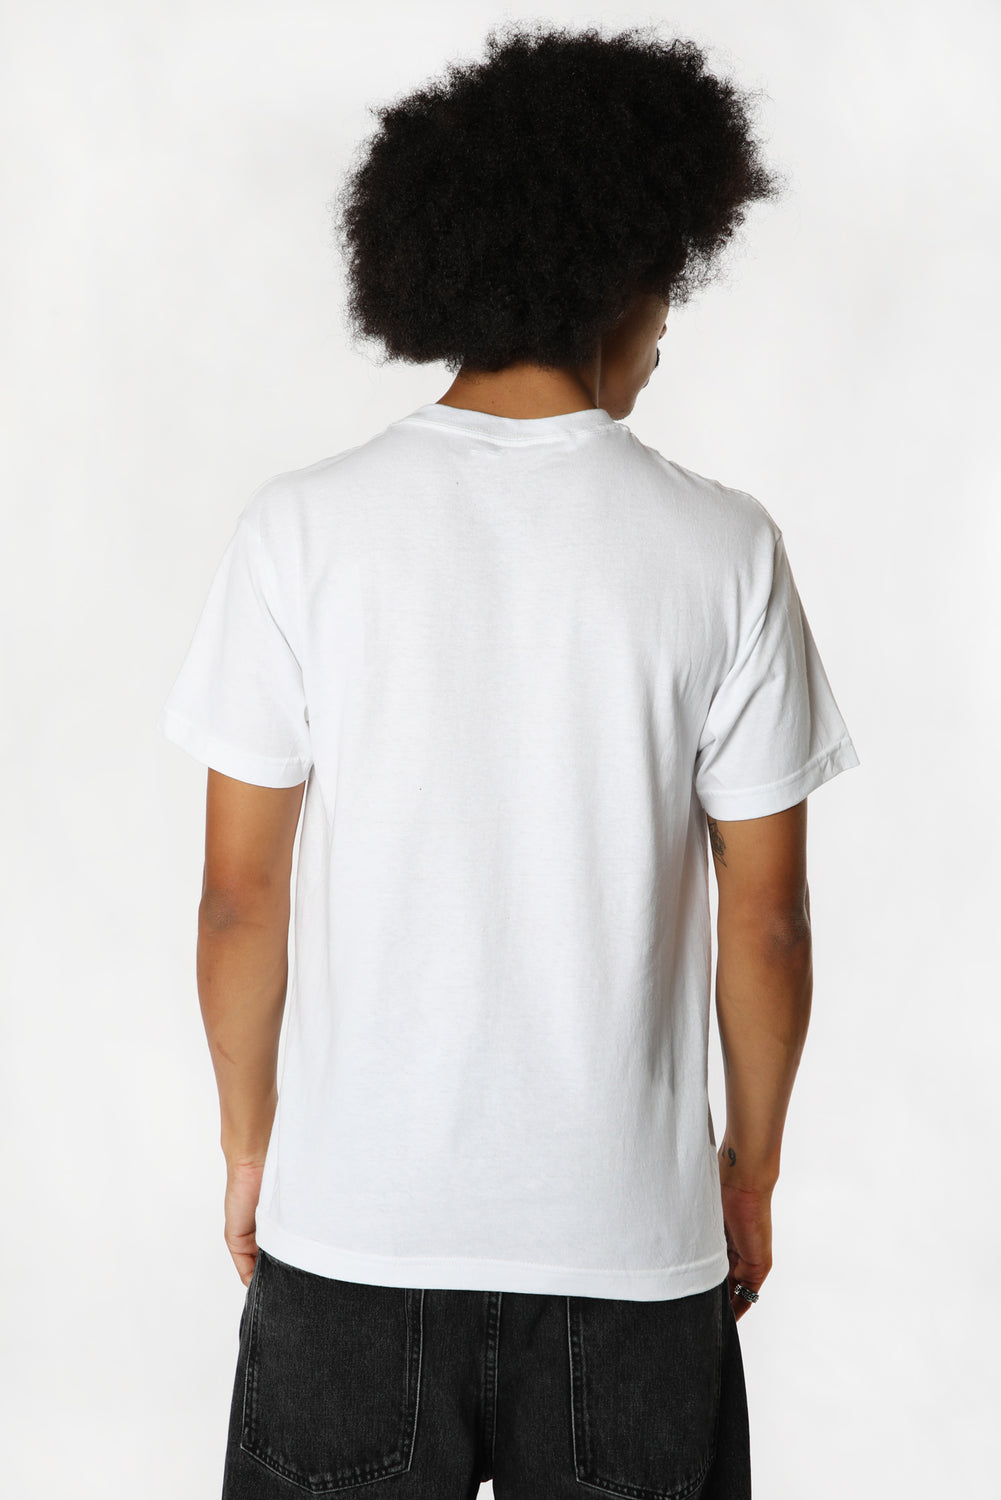 T-Shirt Sidelines Grizzly Blanc